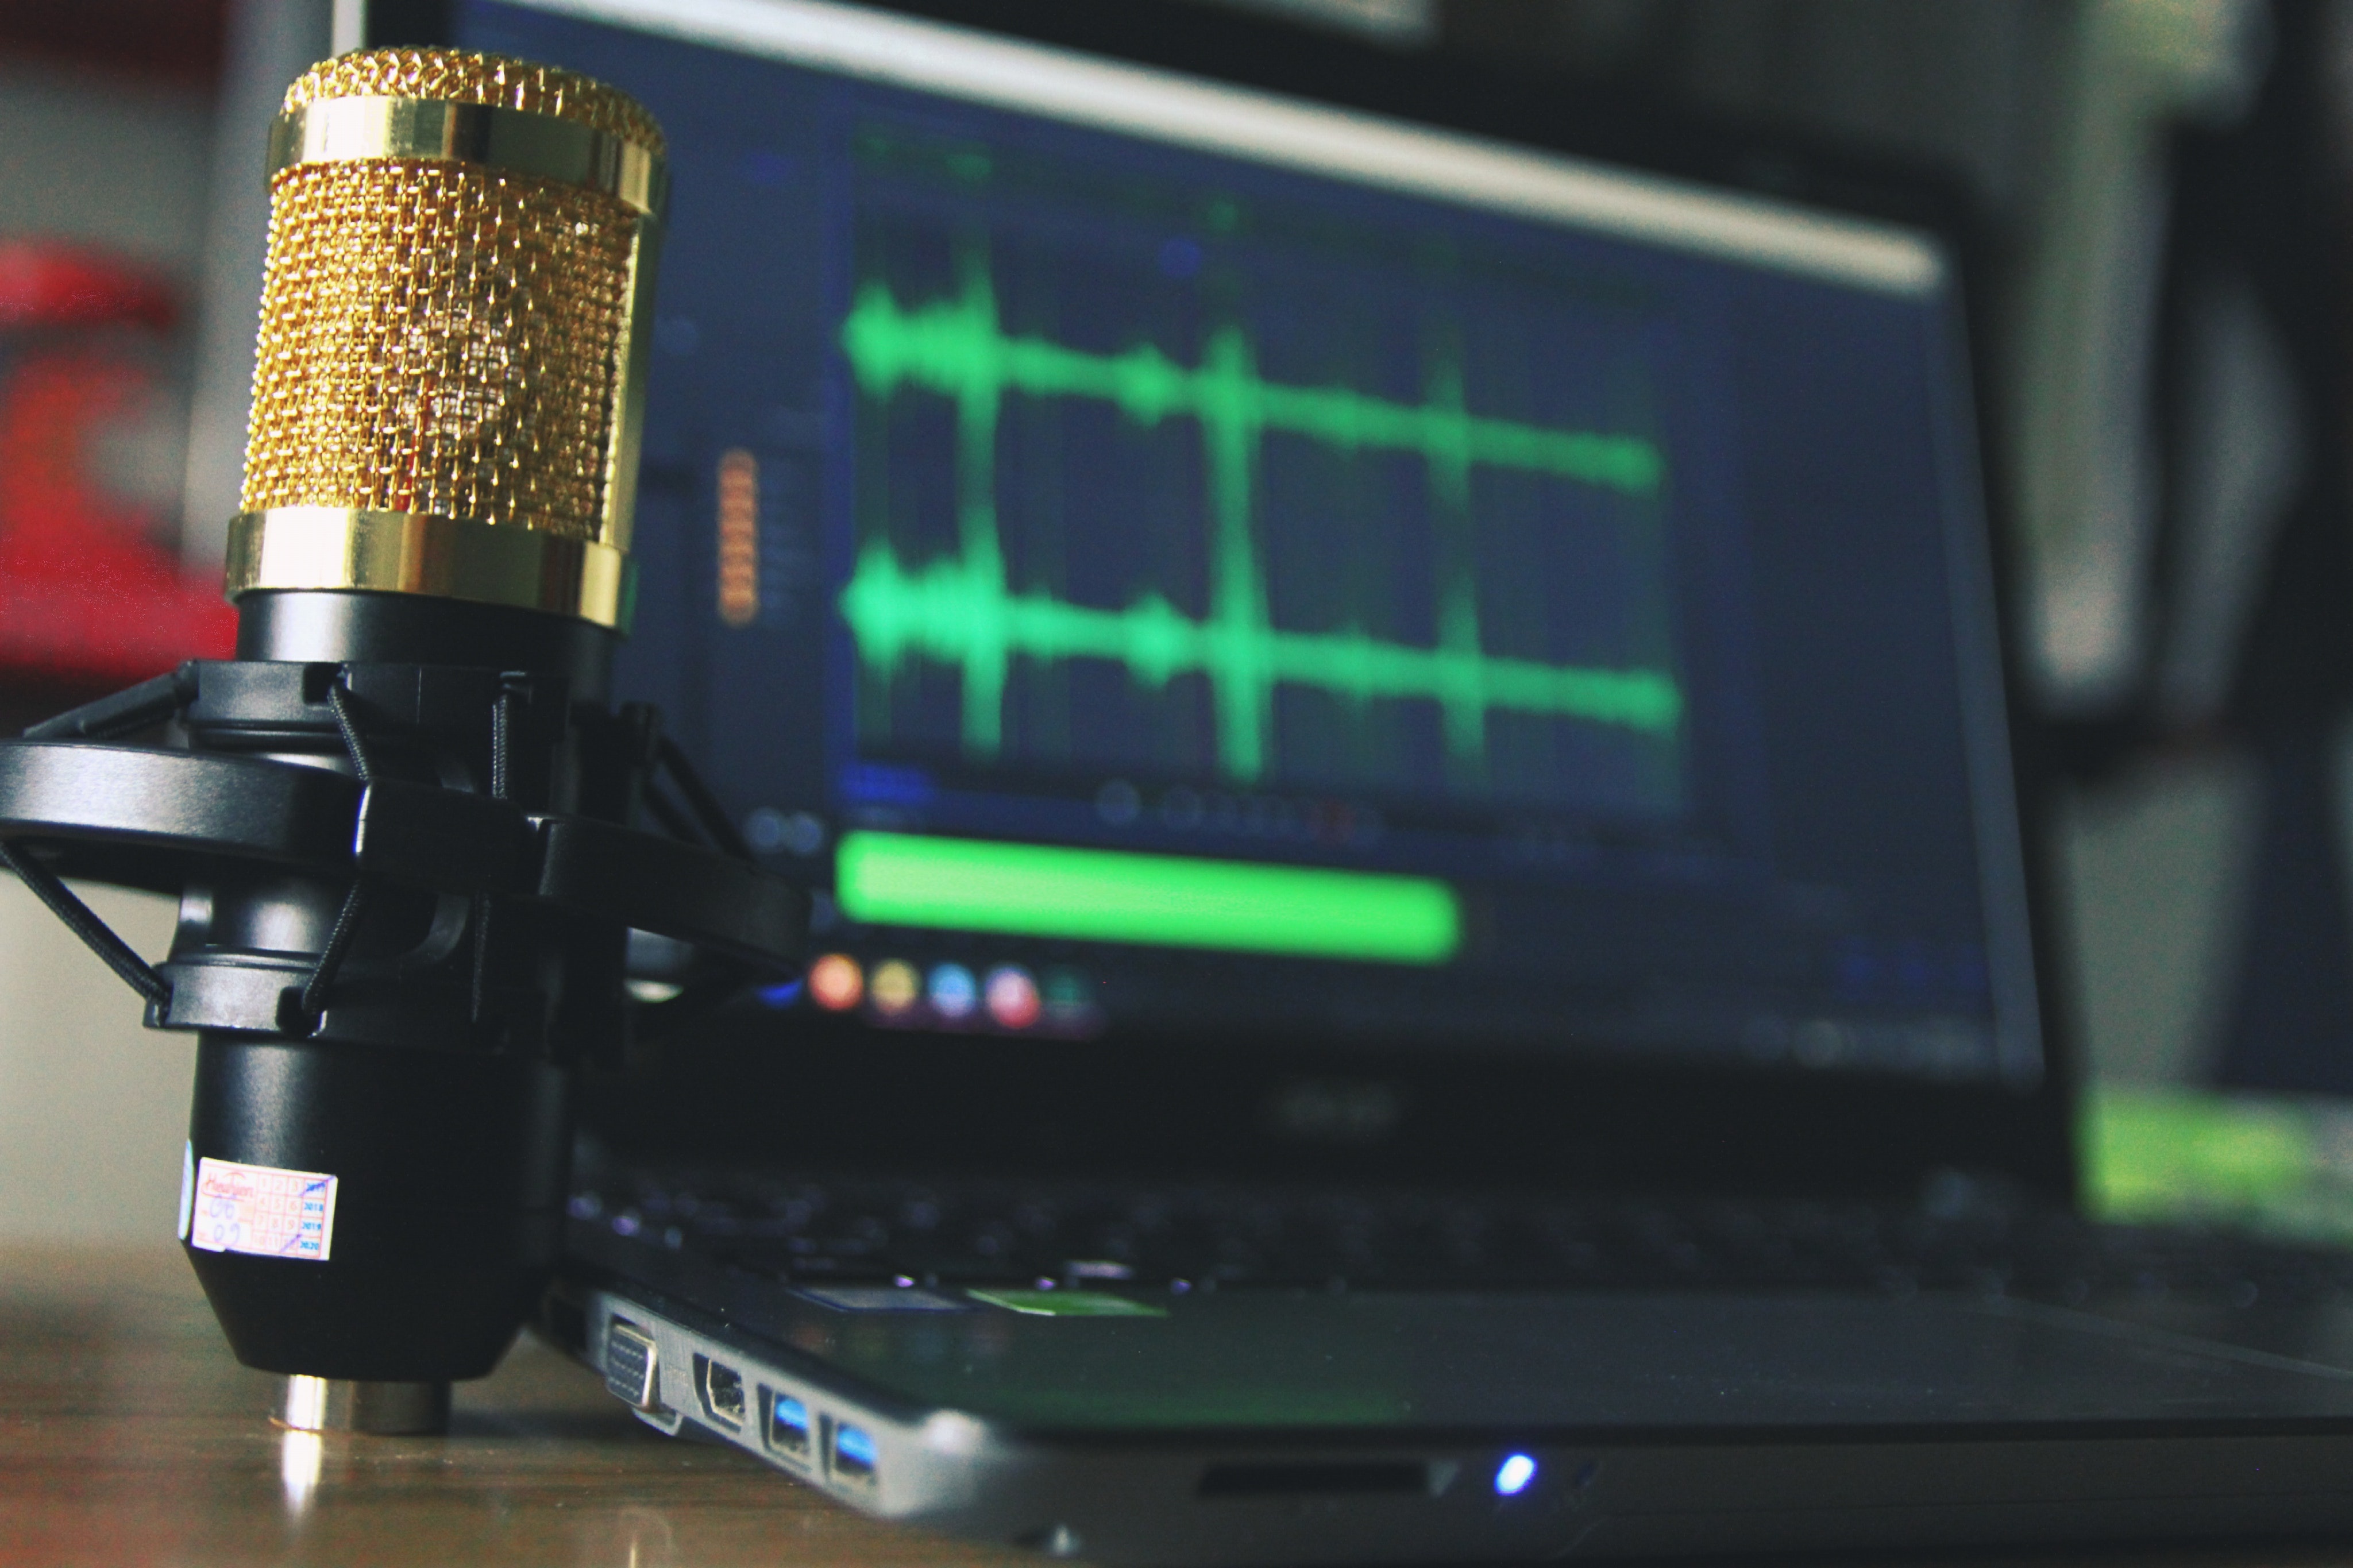 The UK Actor's Guide to Setting Up a Home Voiceover Studio